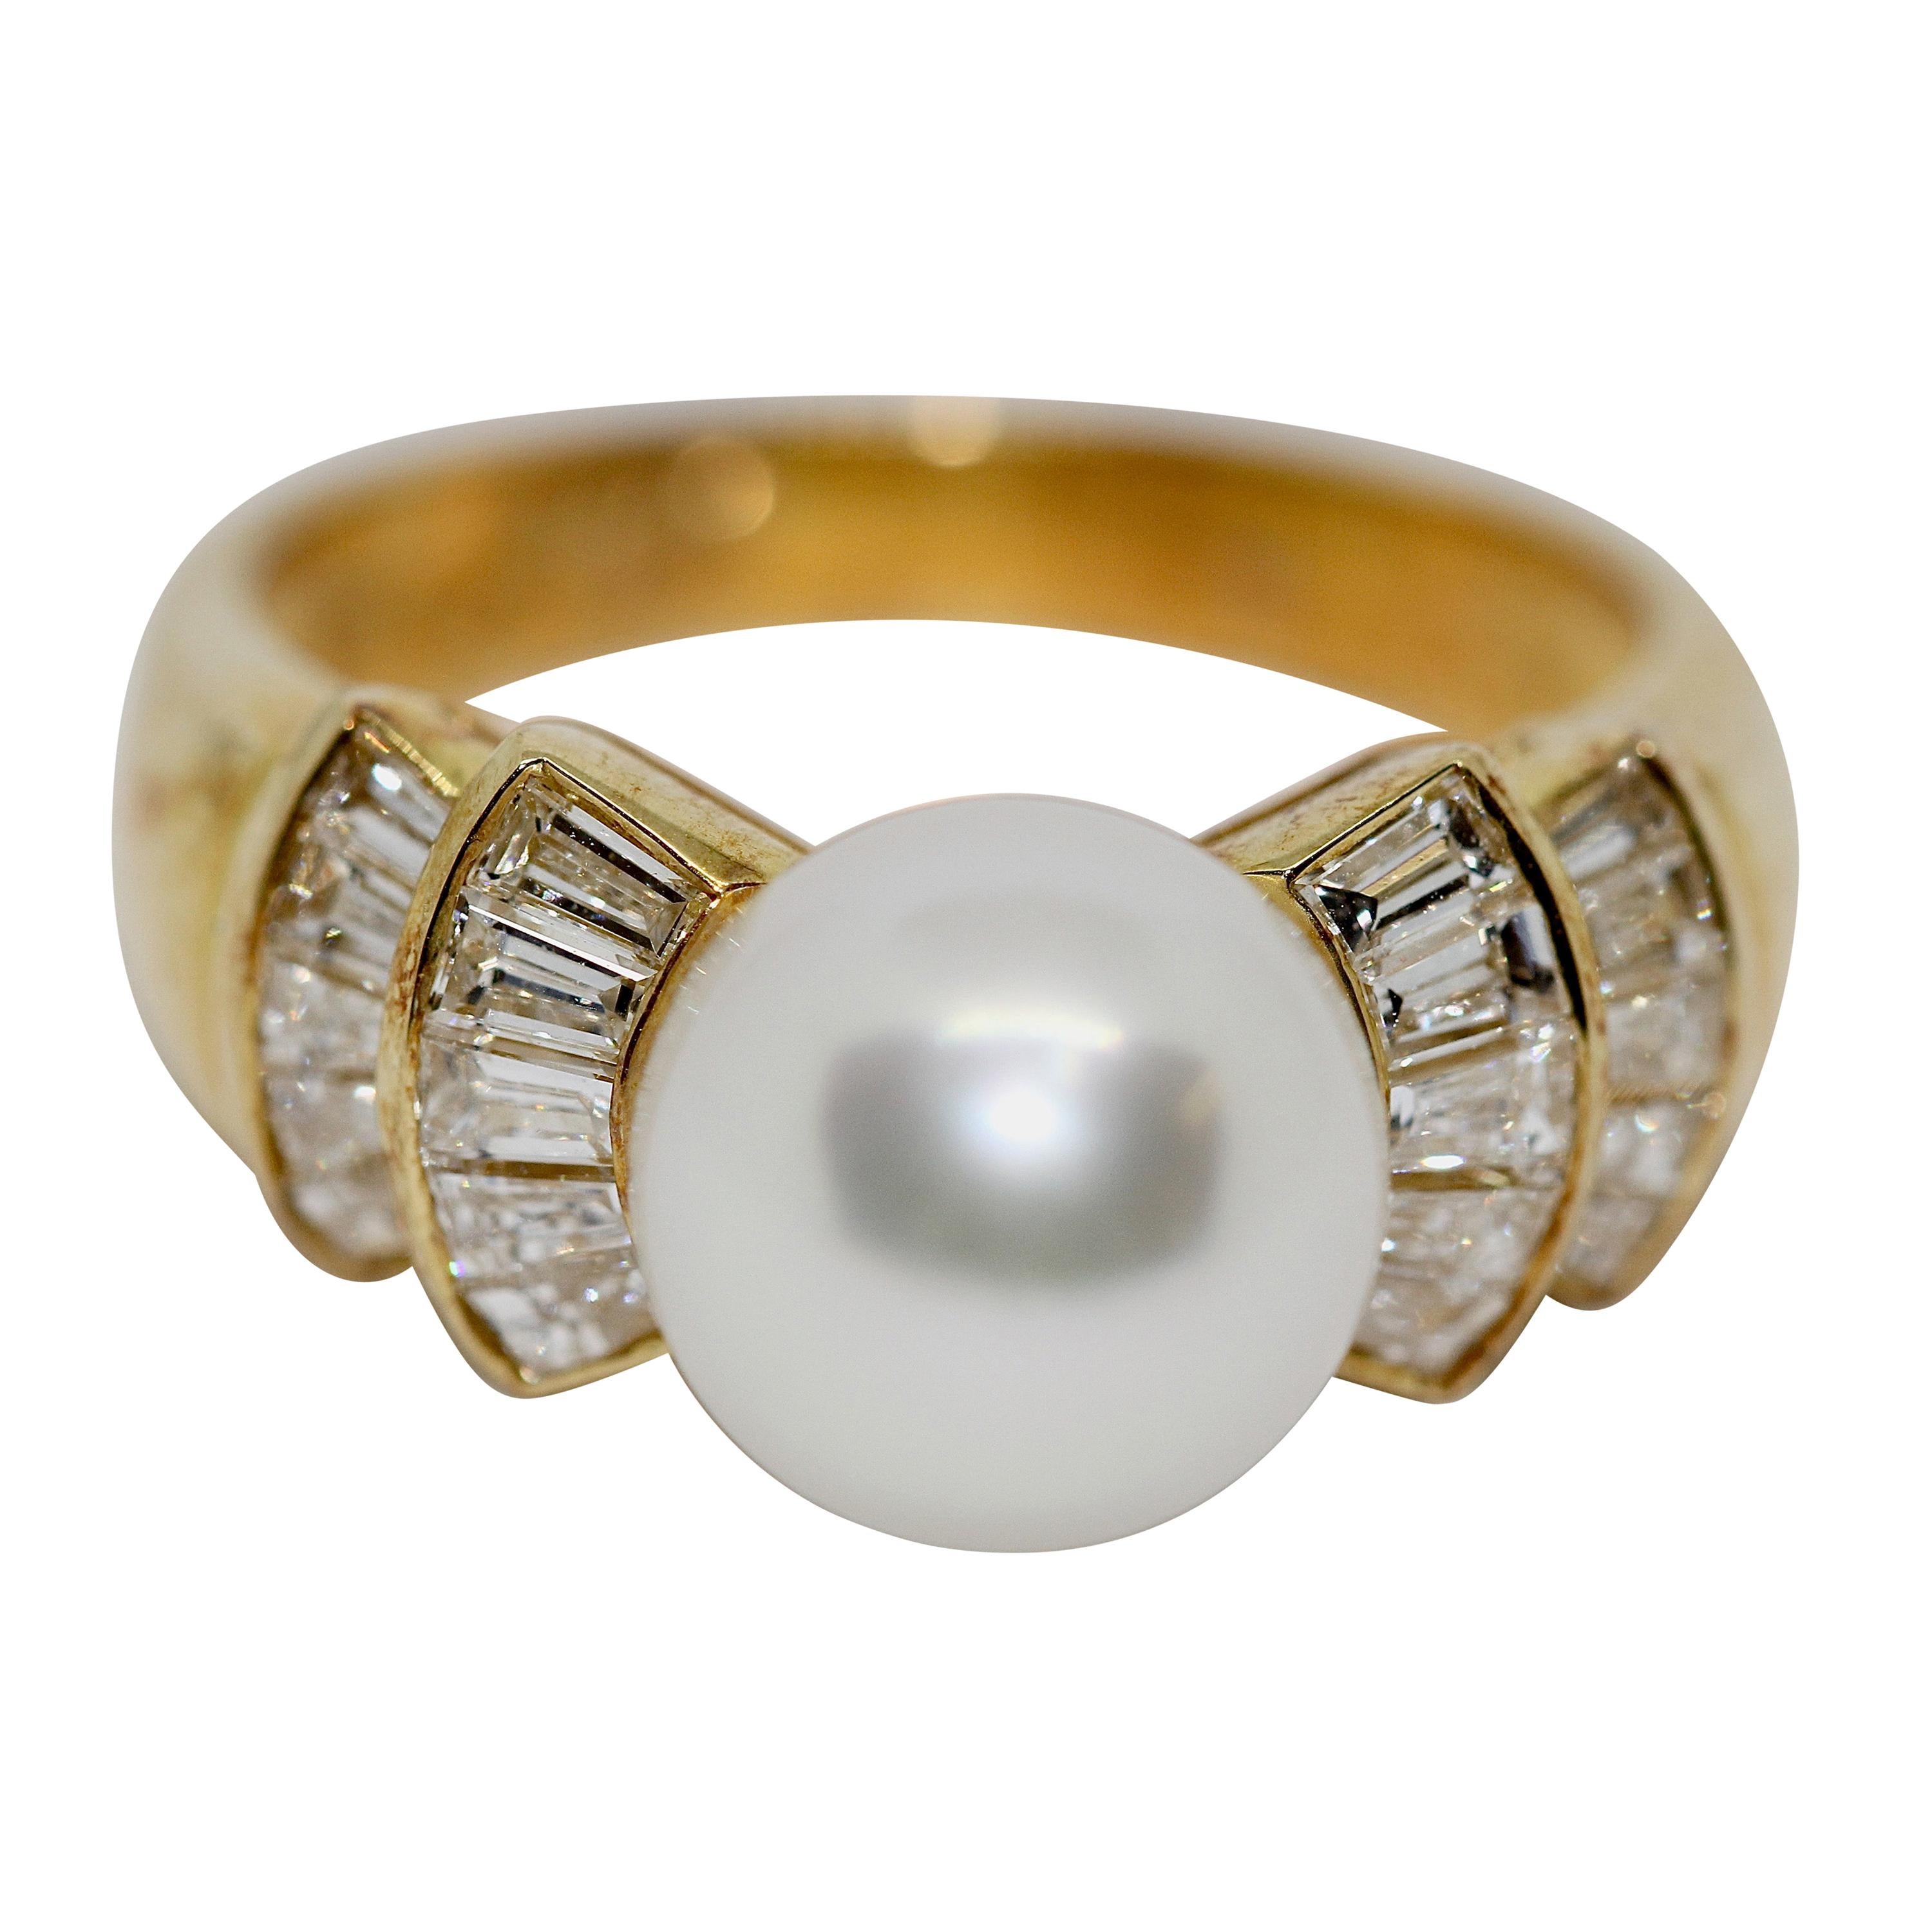 18 Karat Ladies Gold Ring Set with 20 Diamonds and Pearl, by Wempe